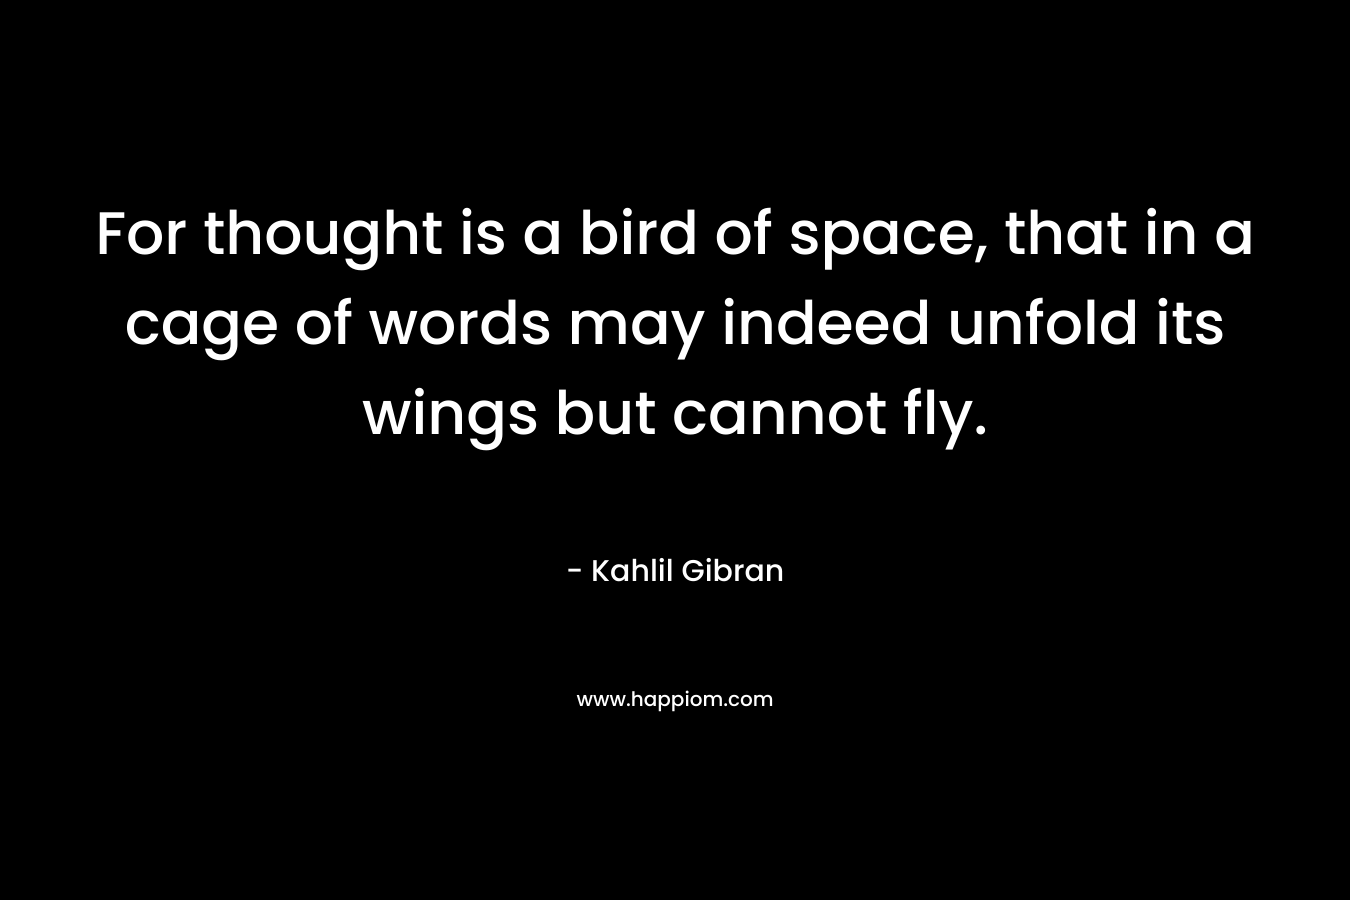 For thought is a bird of space, that in a cage of words may indeed unfold its wings but cannot fly. – Kahlil Gibran